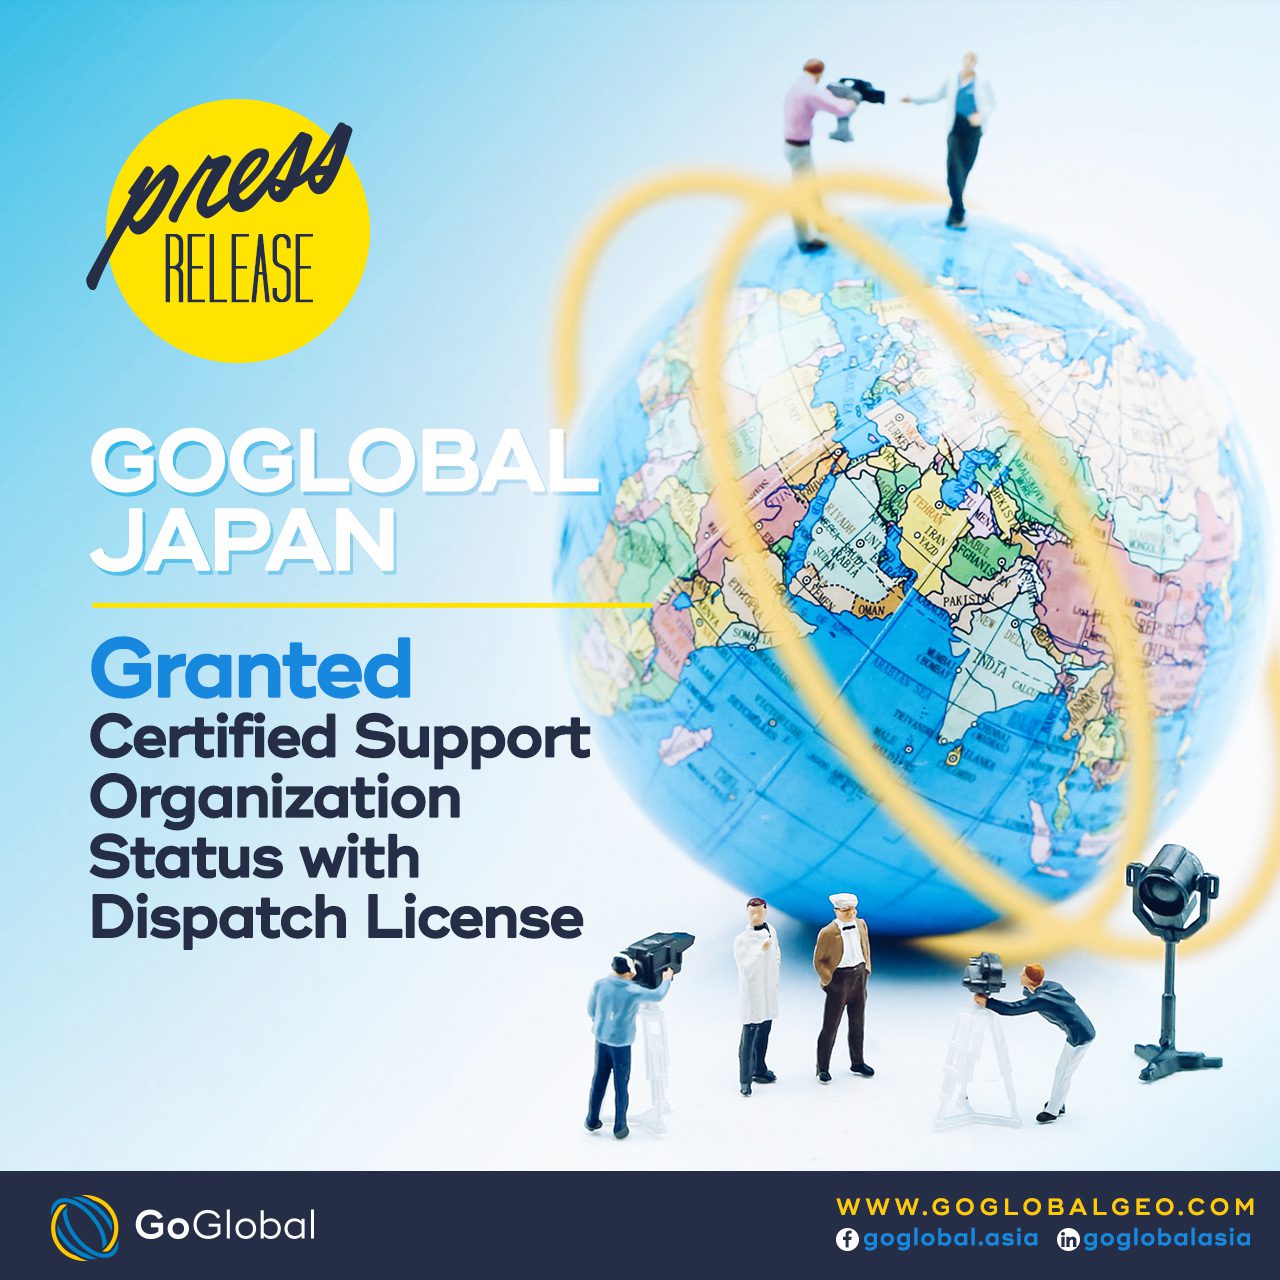 Press Release: GoGlobal Japan Granted Certified Support Organization Status with Dispatch License